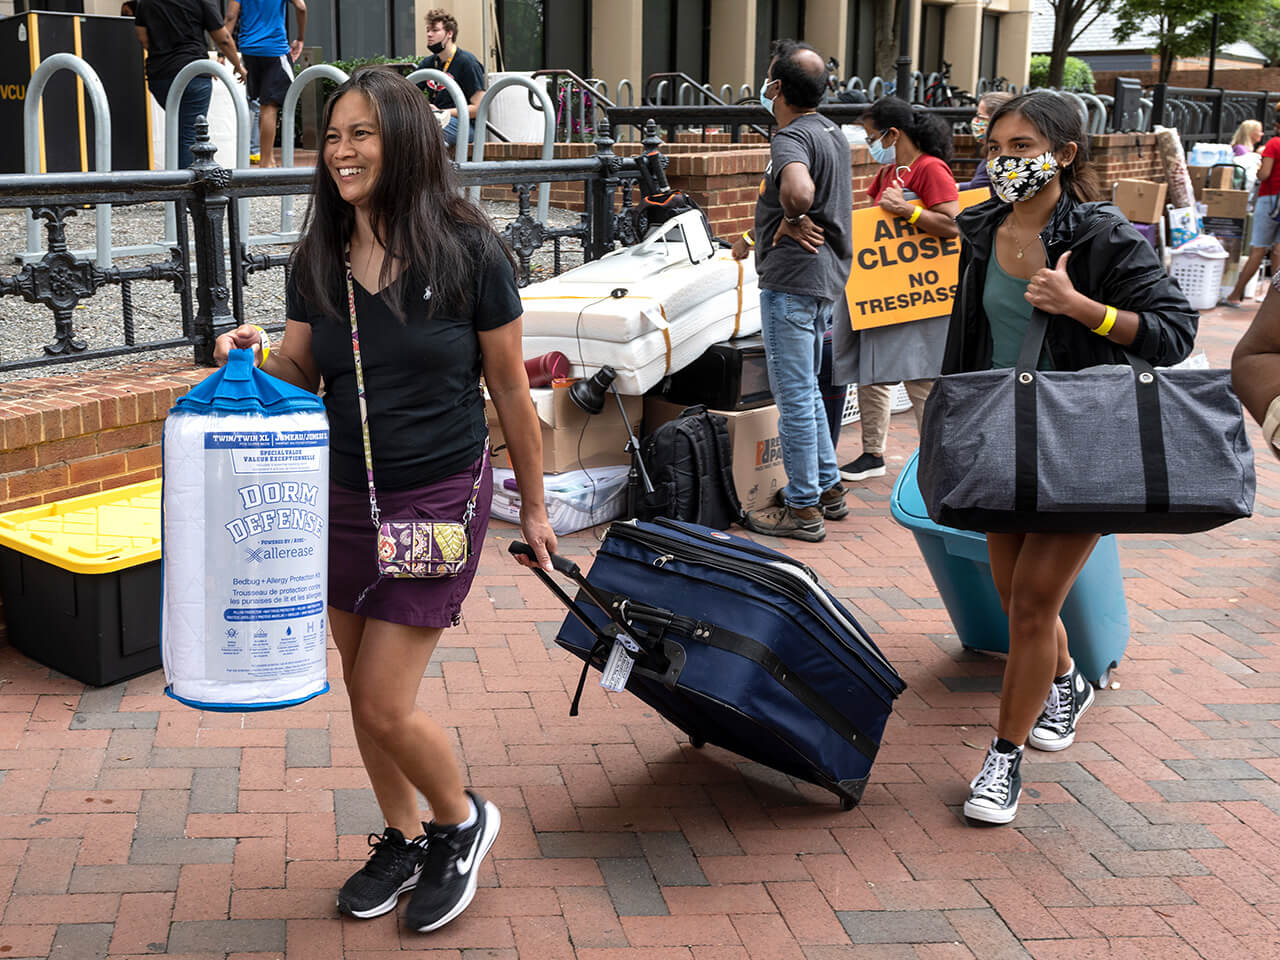 Students moving into the dorms carrying luggage